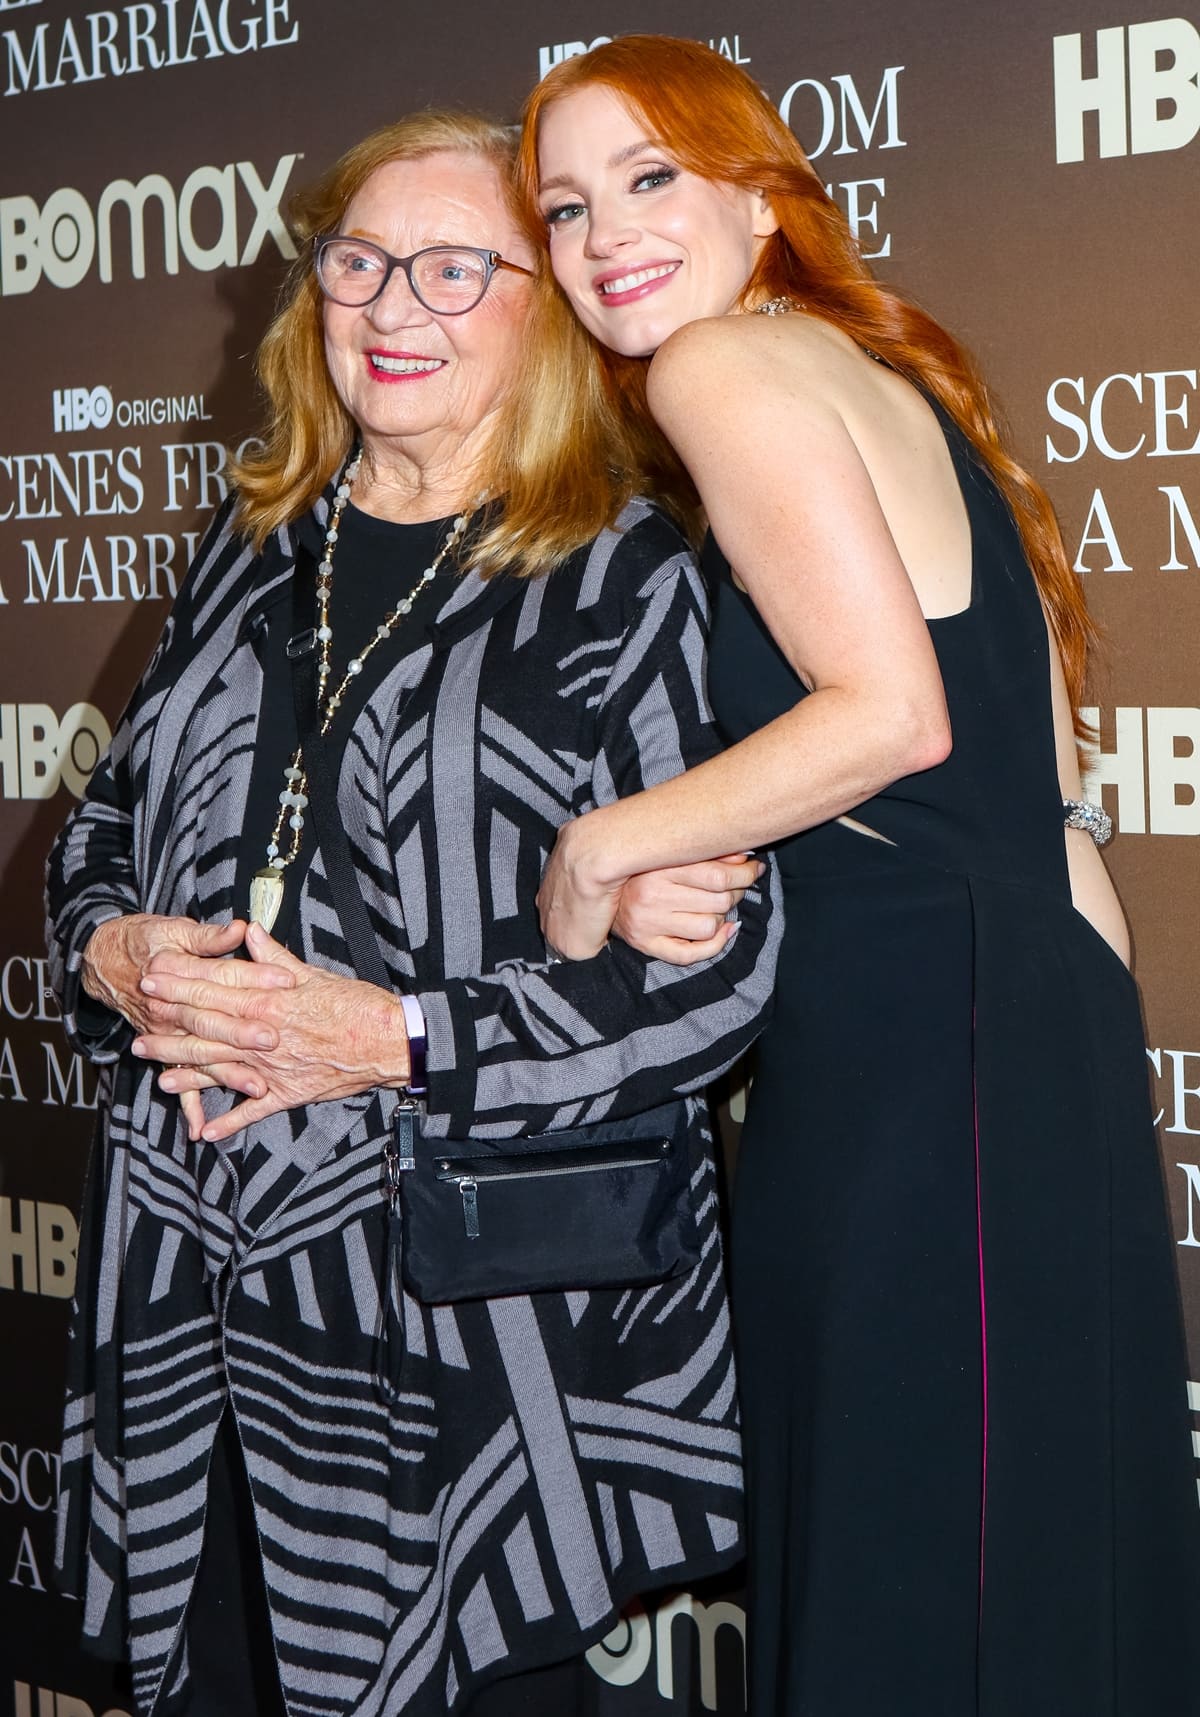 Jessica Chastain is very close to her grandmother Marilyn Herst